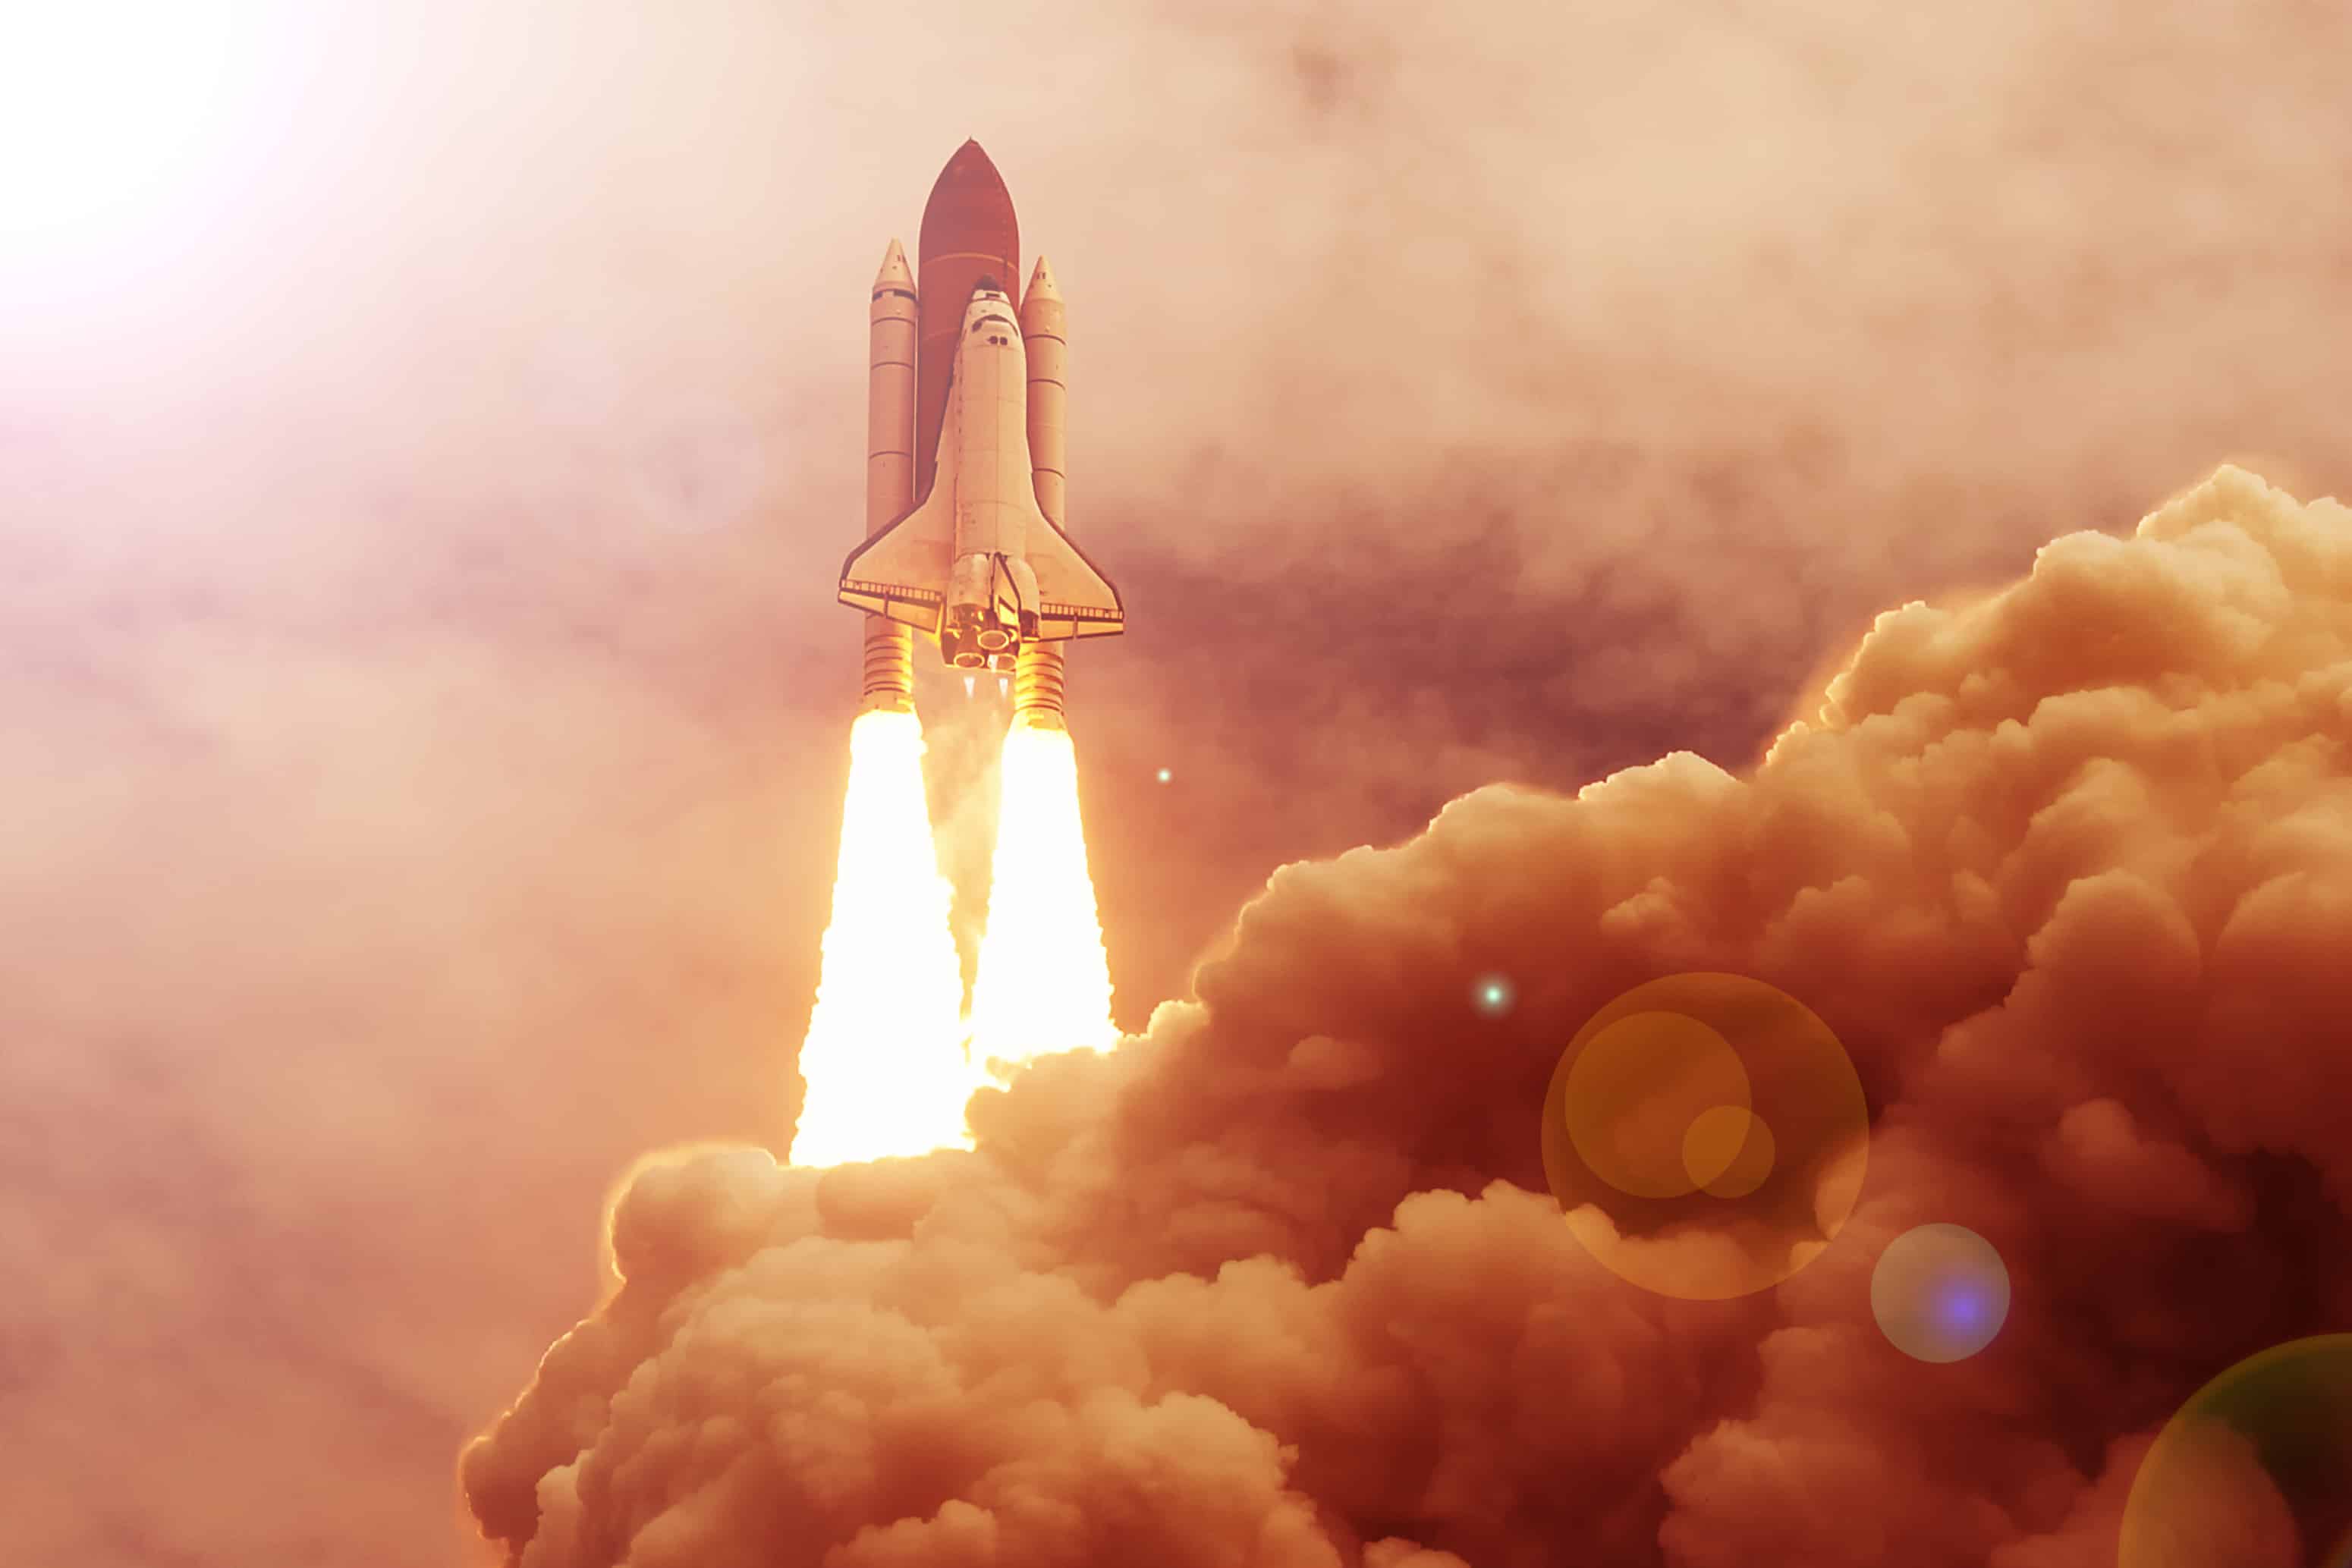 Pardot launch plan: What to expect in your first 30 days